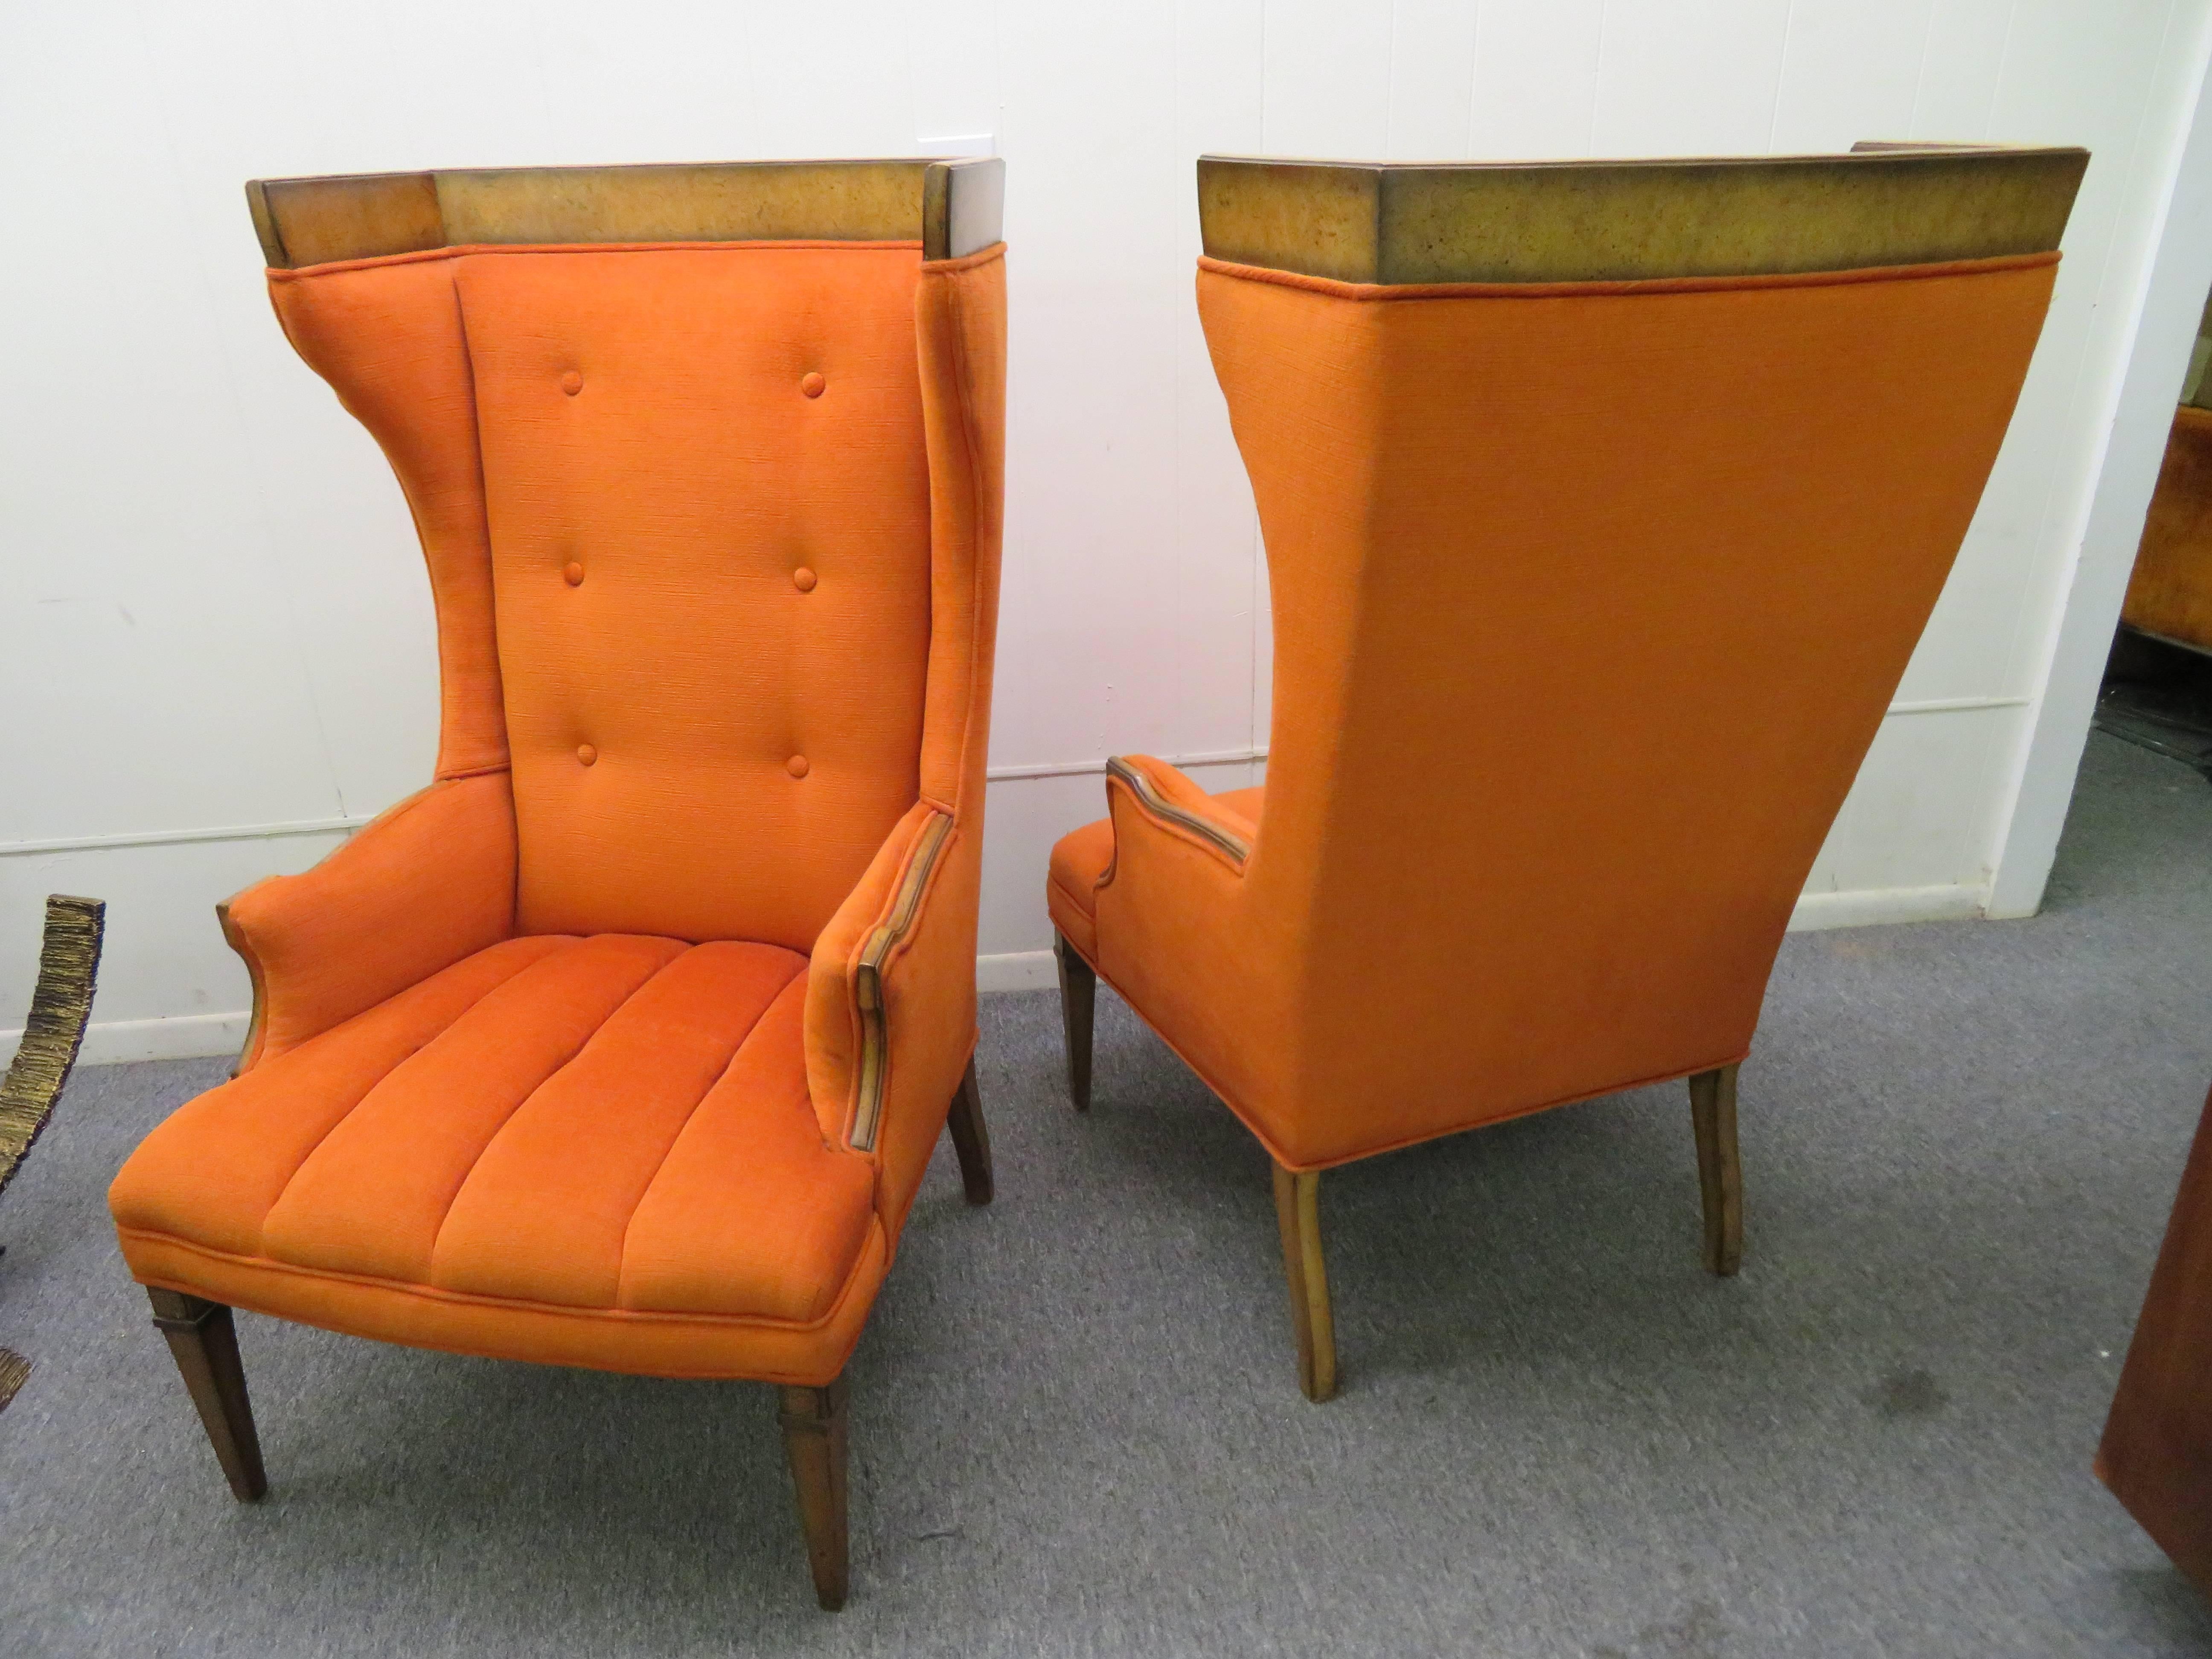 Stunning pair of Tomlinson Sophisticate style tall wing back chairs. These chairs have a distressed finish walnut top edge, sculpted arms and legs-great vintage appeal. The original orange fabric still looks great.